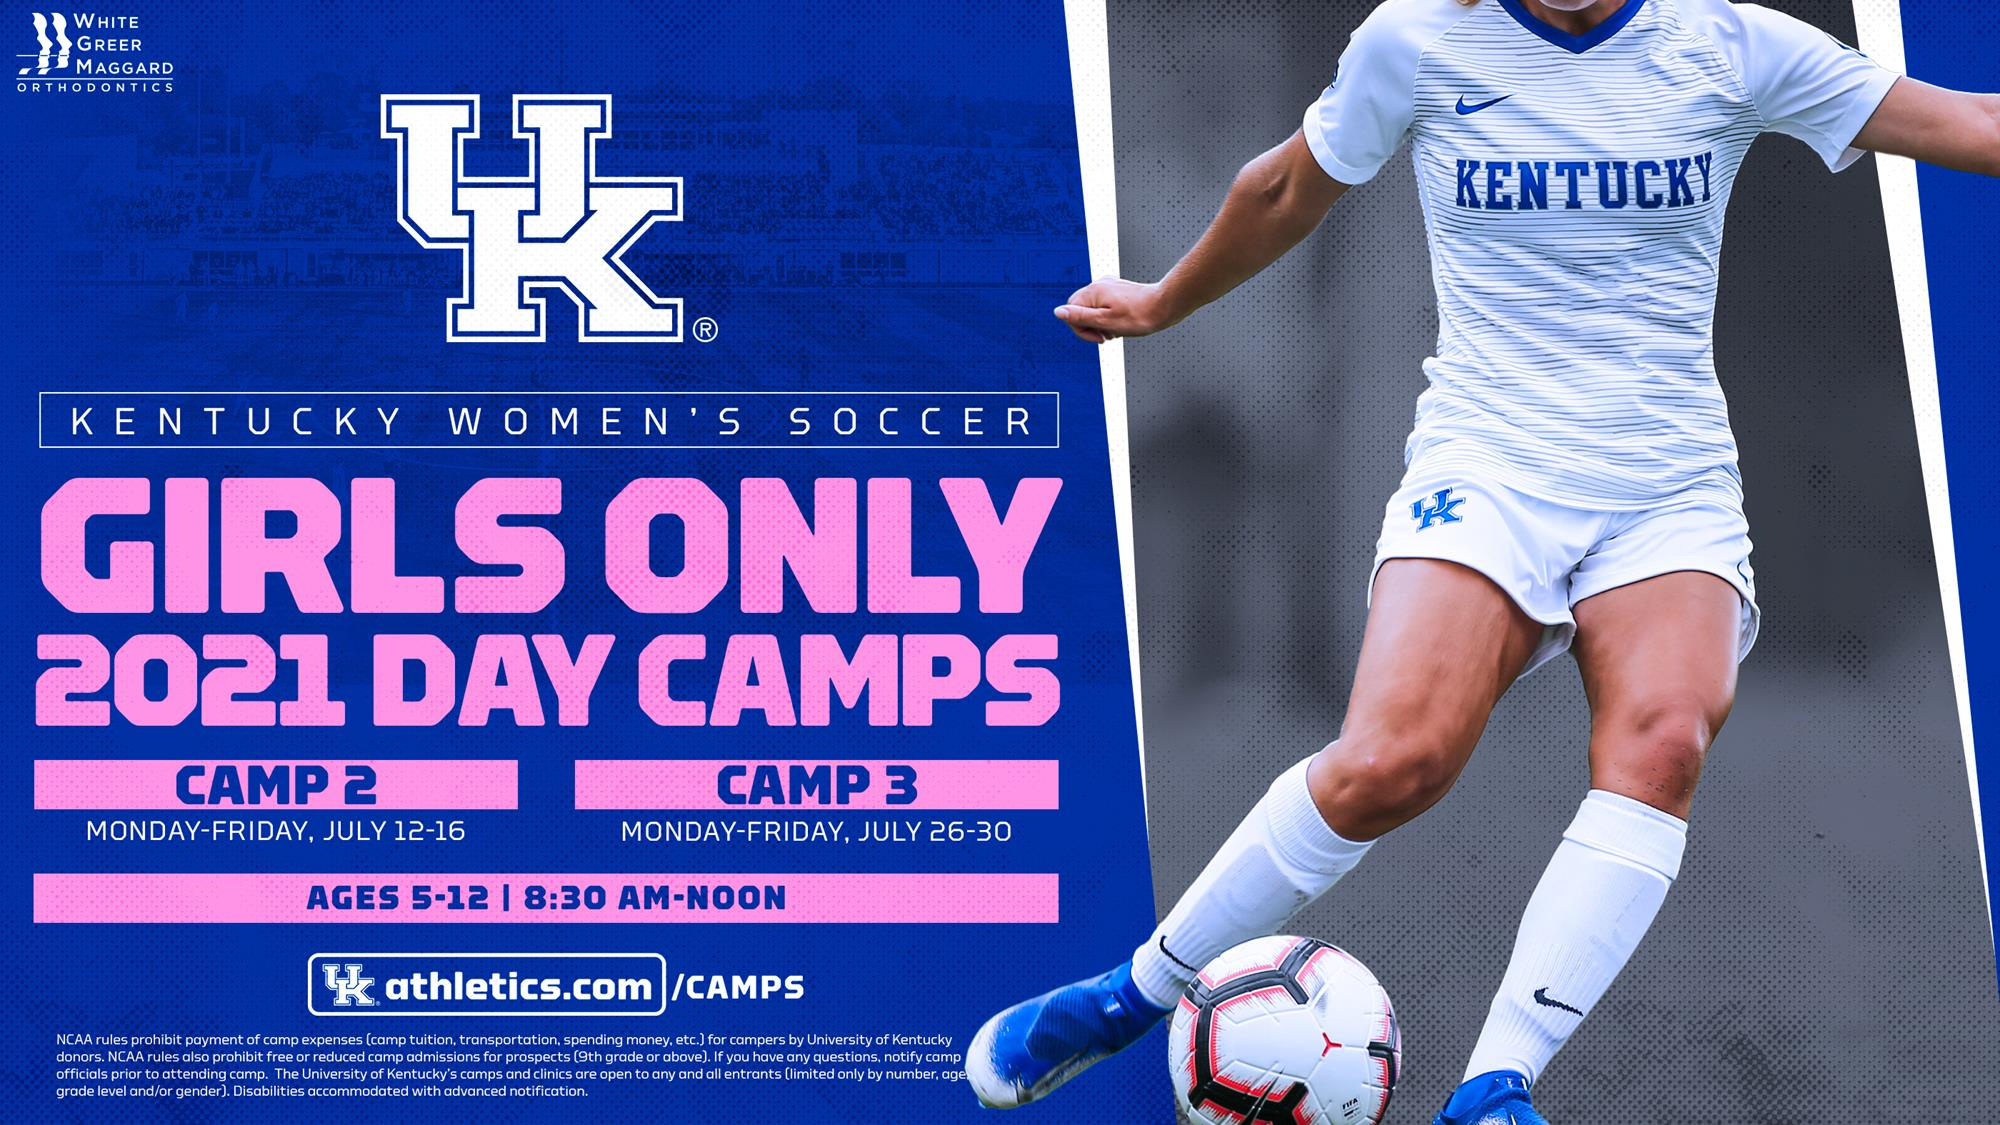 2021 Women's Soccer Girls Only Day Camps